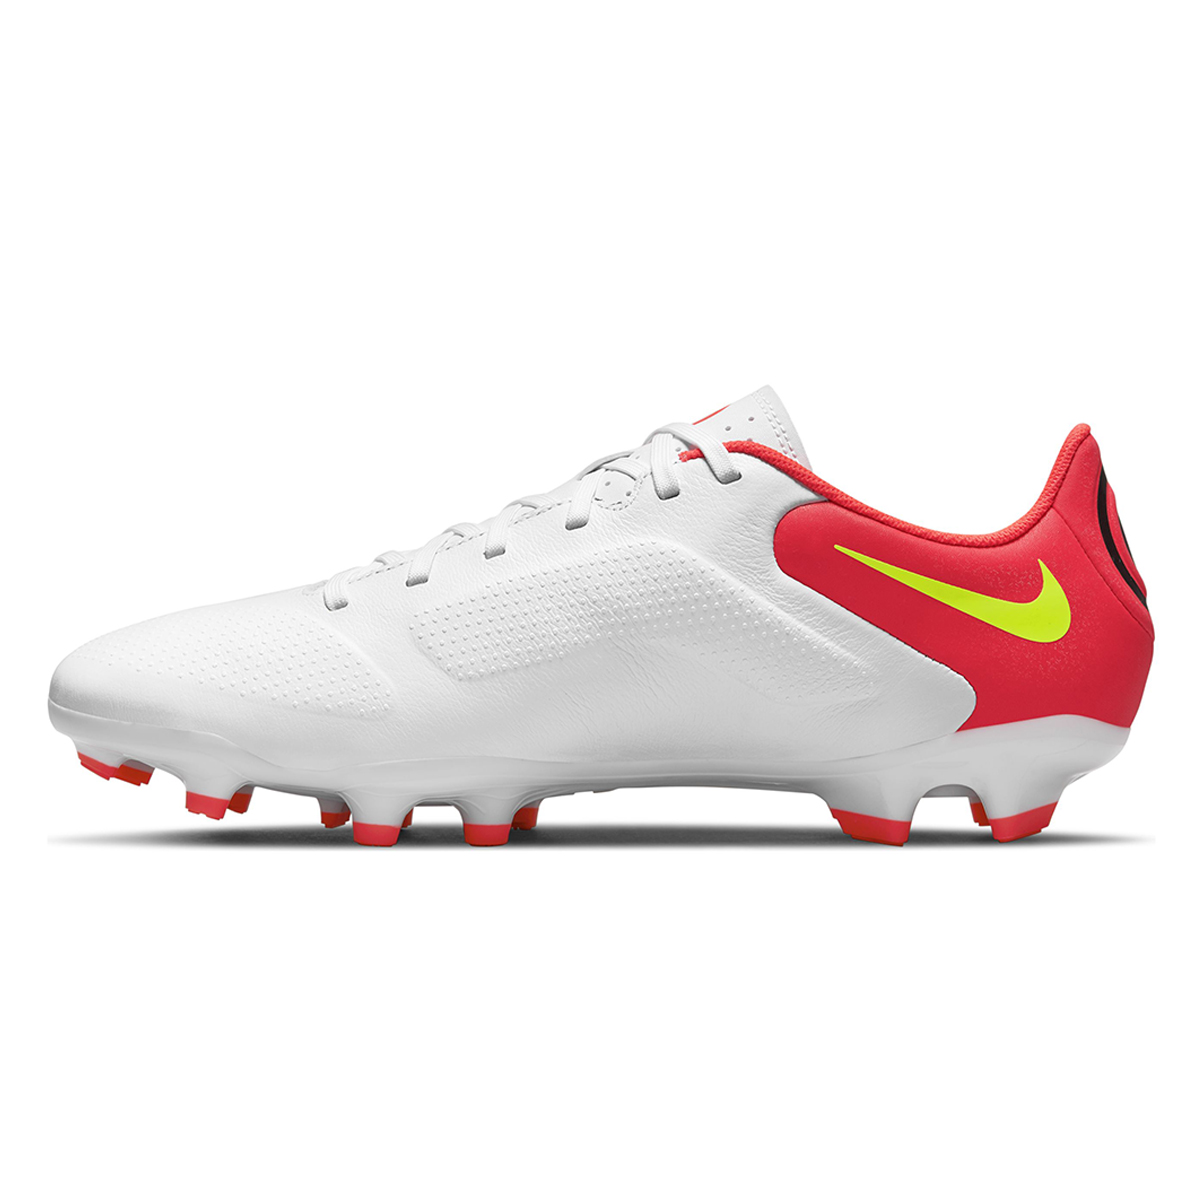 Botines Nike Legend 9 Academy Fg/Mg,  image number null